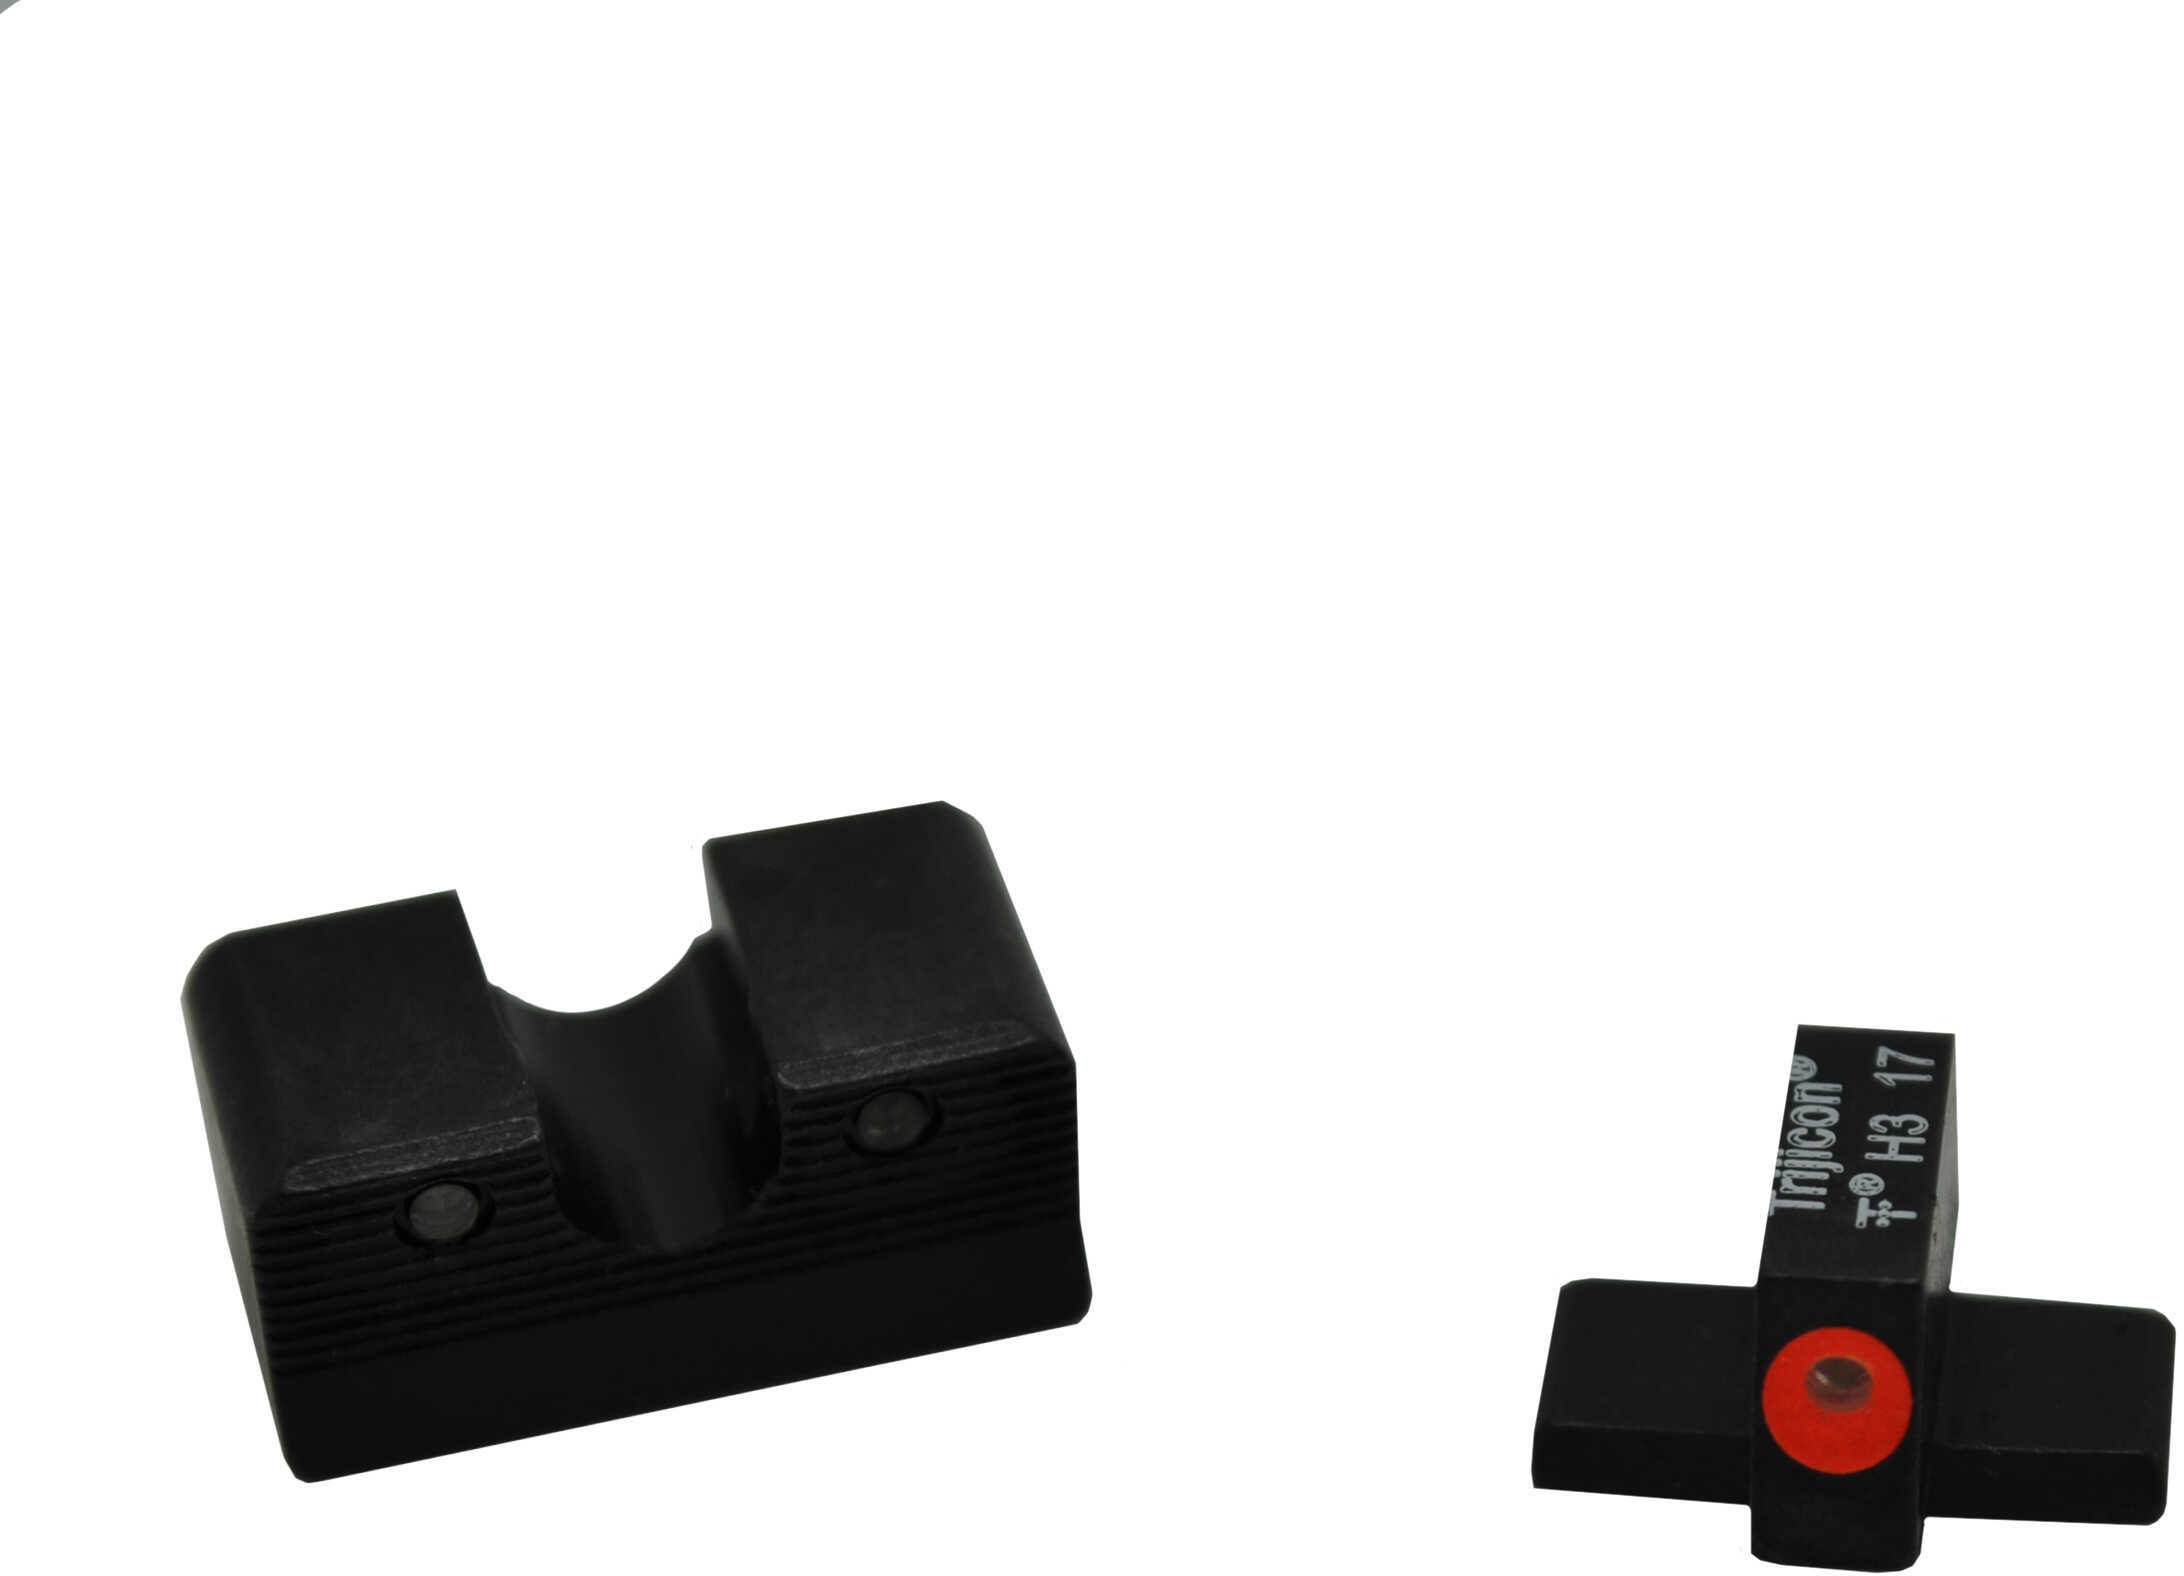 Trijicon HD XR Night Sight Set Orange Front Outline Comparable to #8 Front/#8 Rear for Sauer Pistols